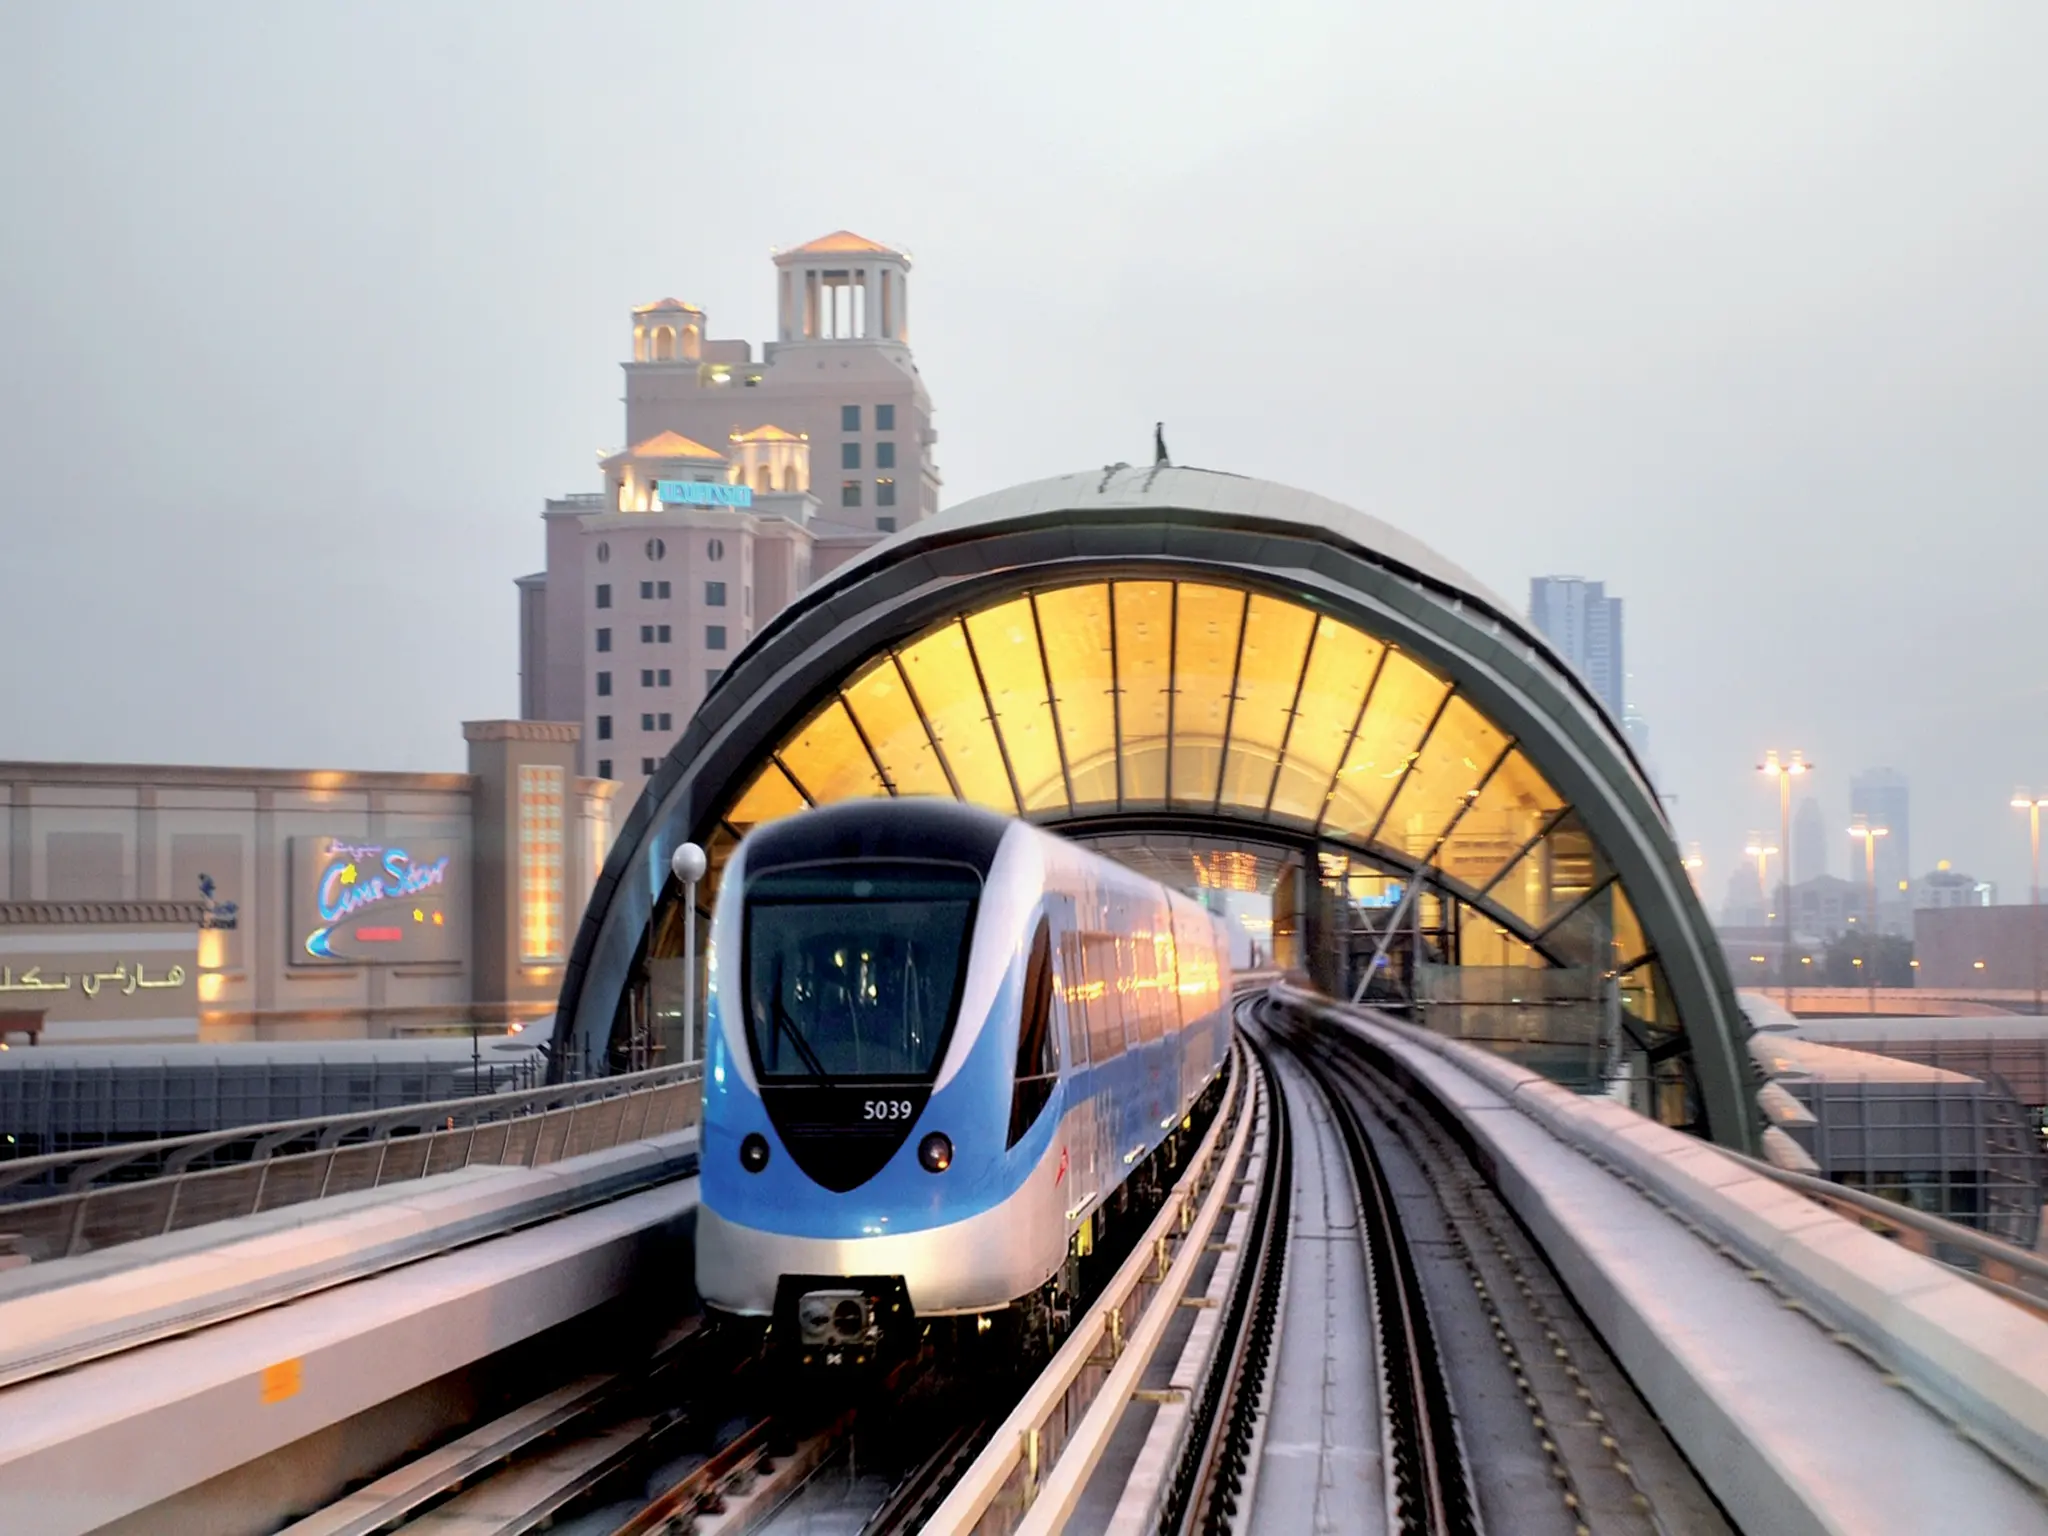 Dubai Metro is delayed again due to a technical fault